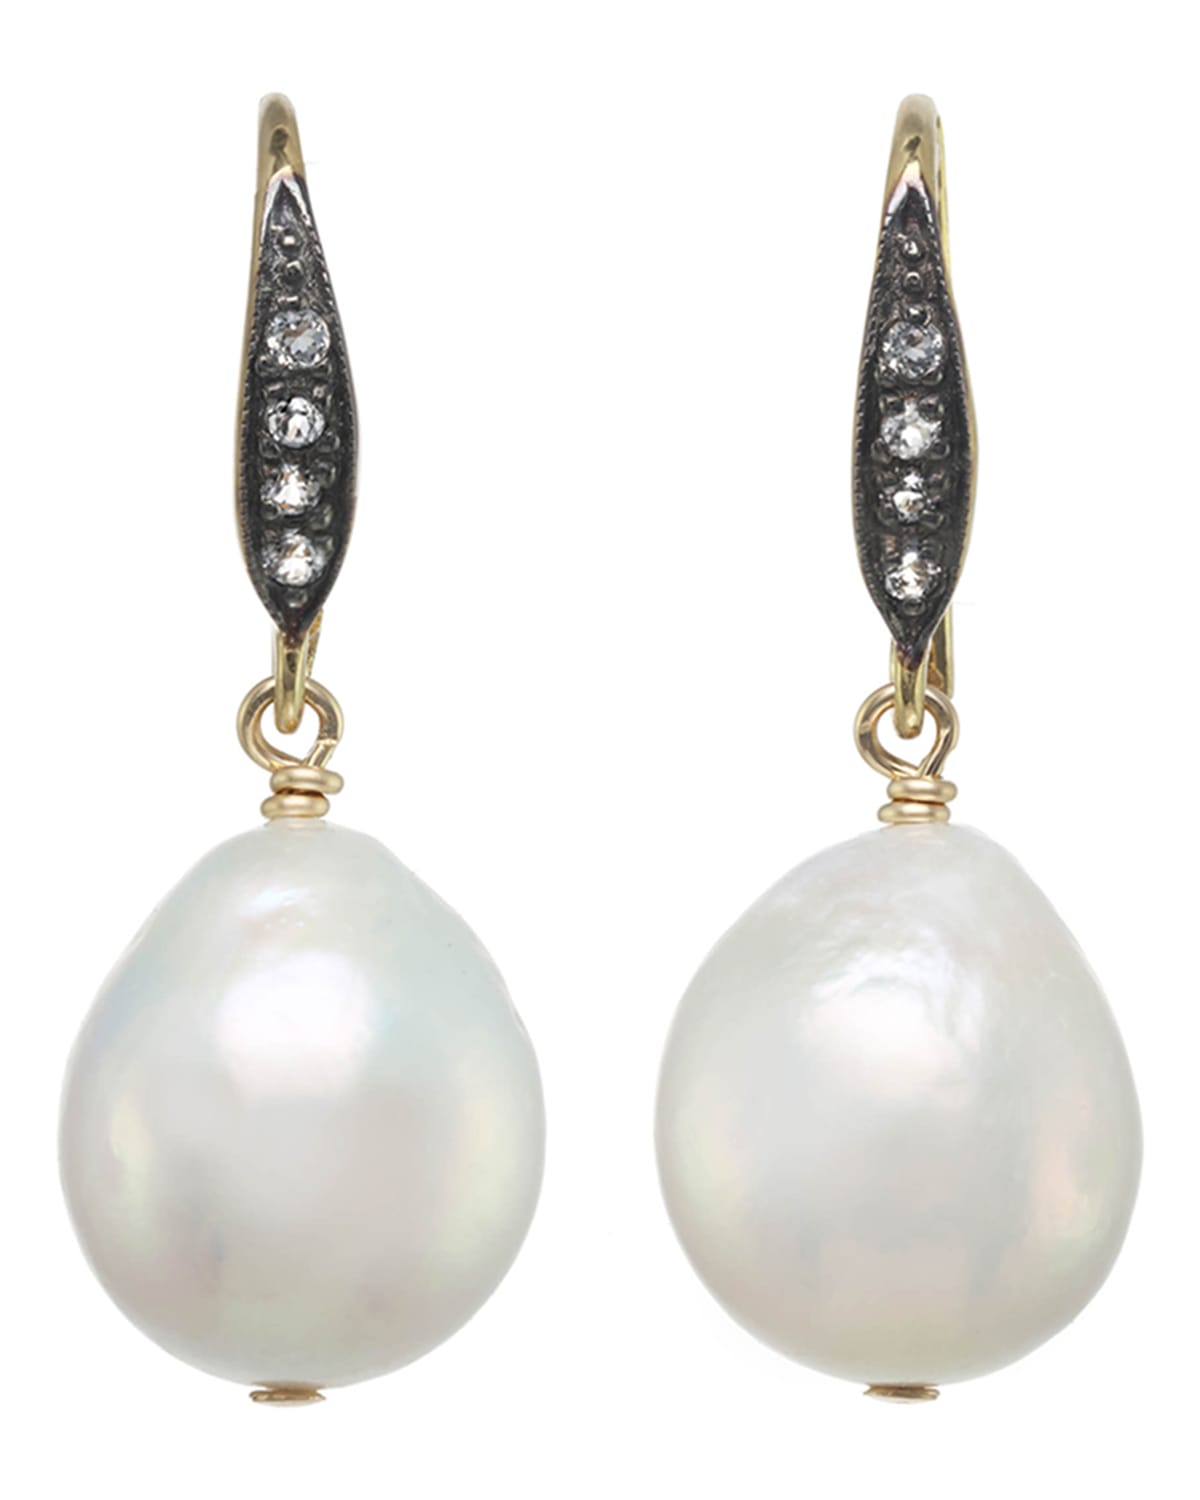 Margo Morrison Grey Baroque Earrings With White Sapphires On A Vermeil Top In White Pearl